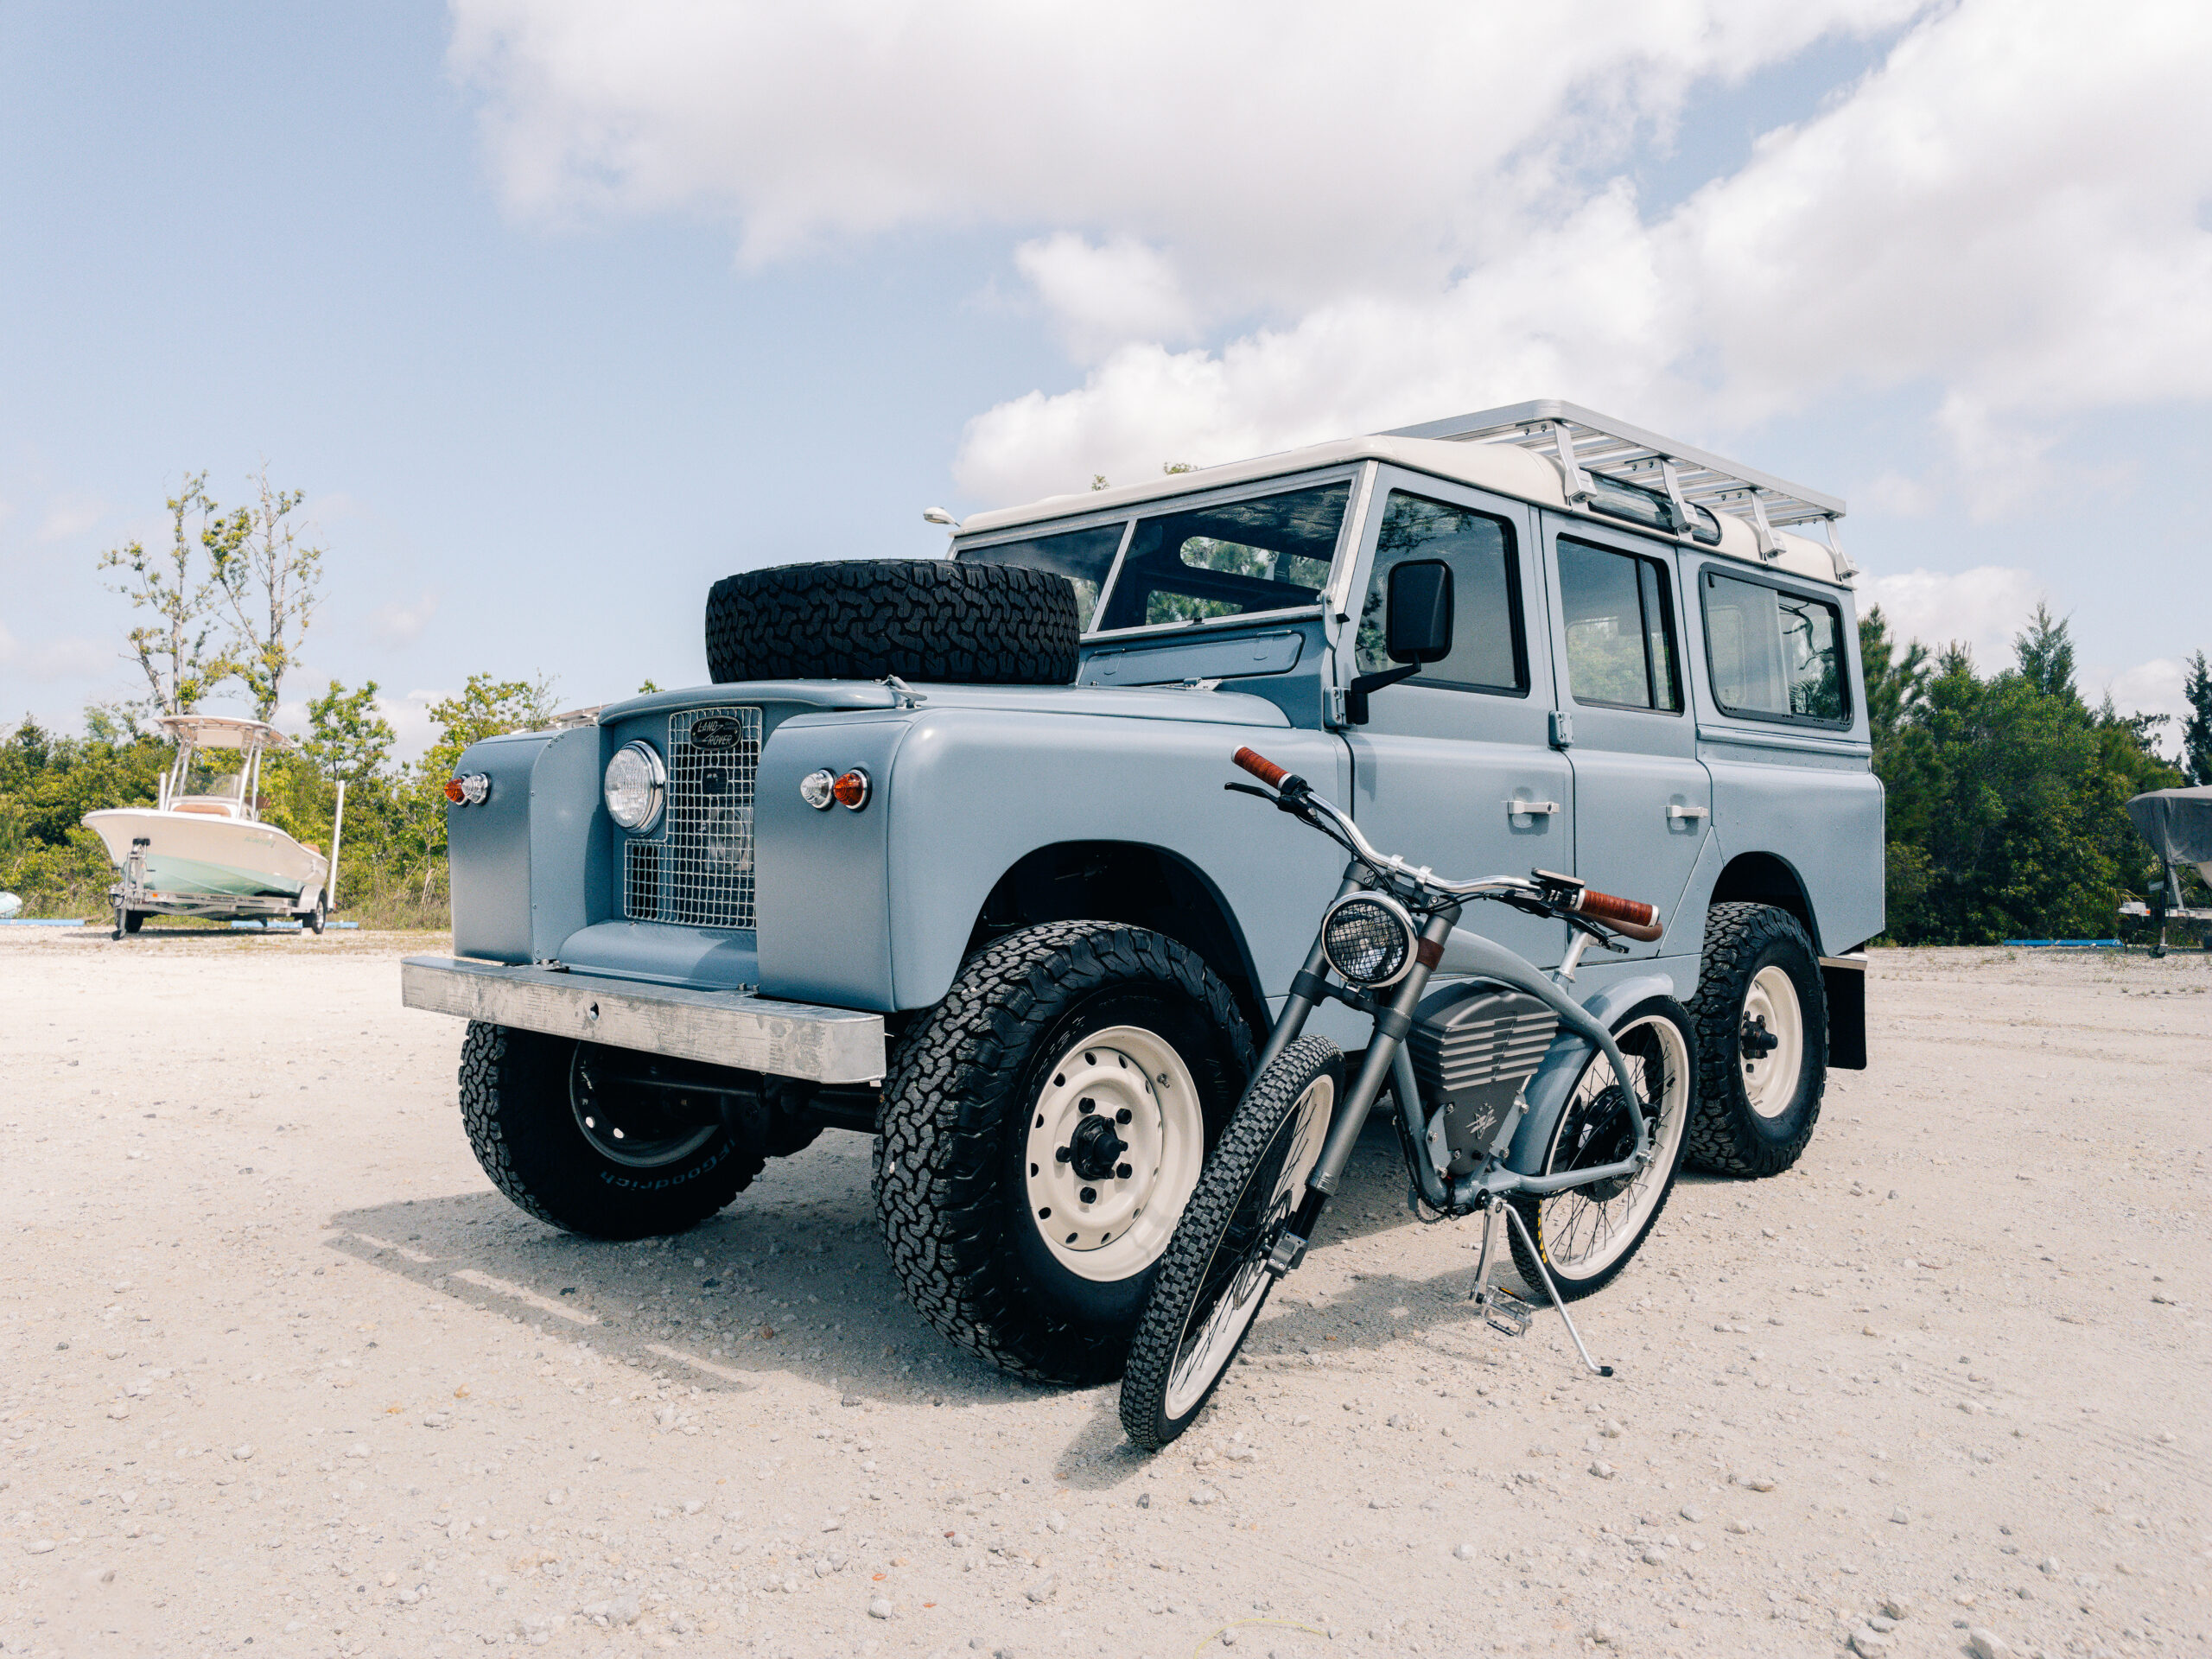 Himalaya 4x4 Pairs Builds With Land Rover-Inspired eBike | THE SHOP